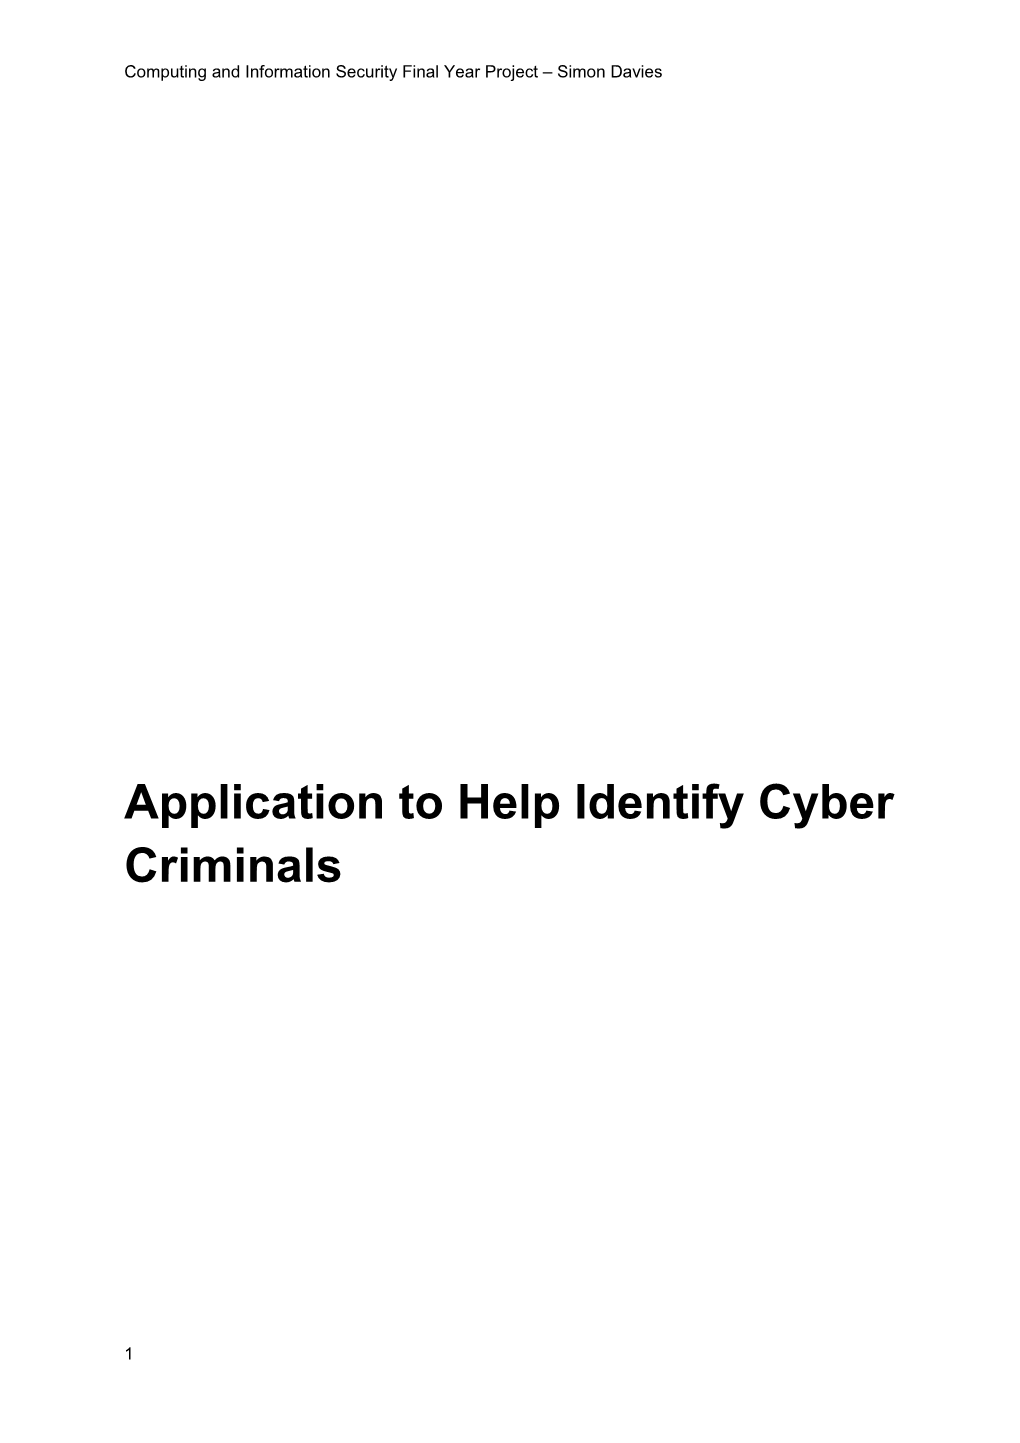 Application to Help Identify Cyber Criminals